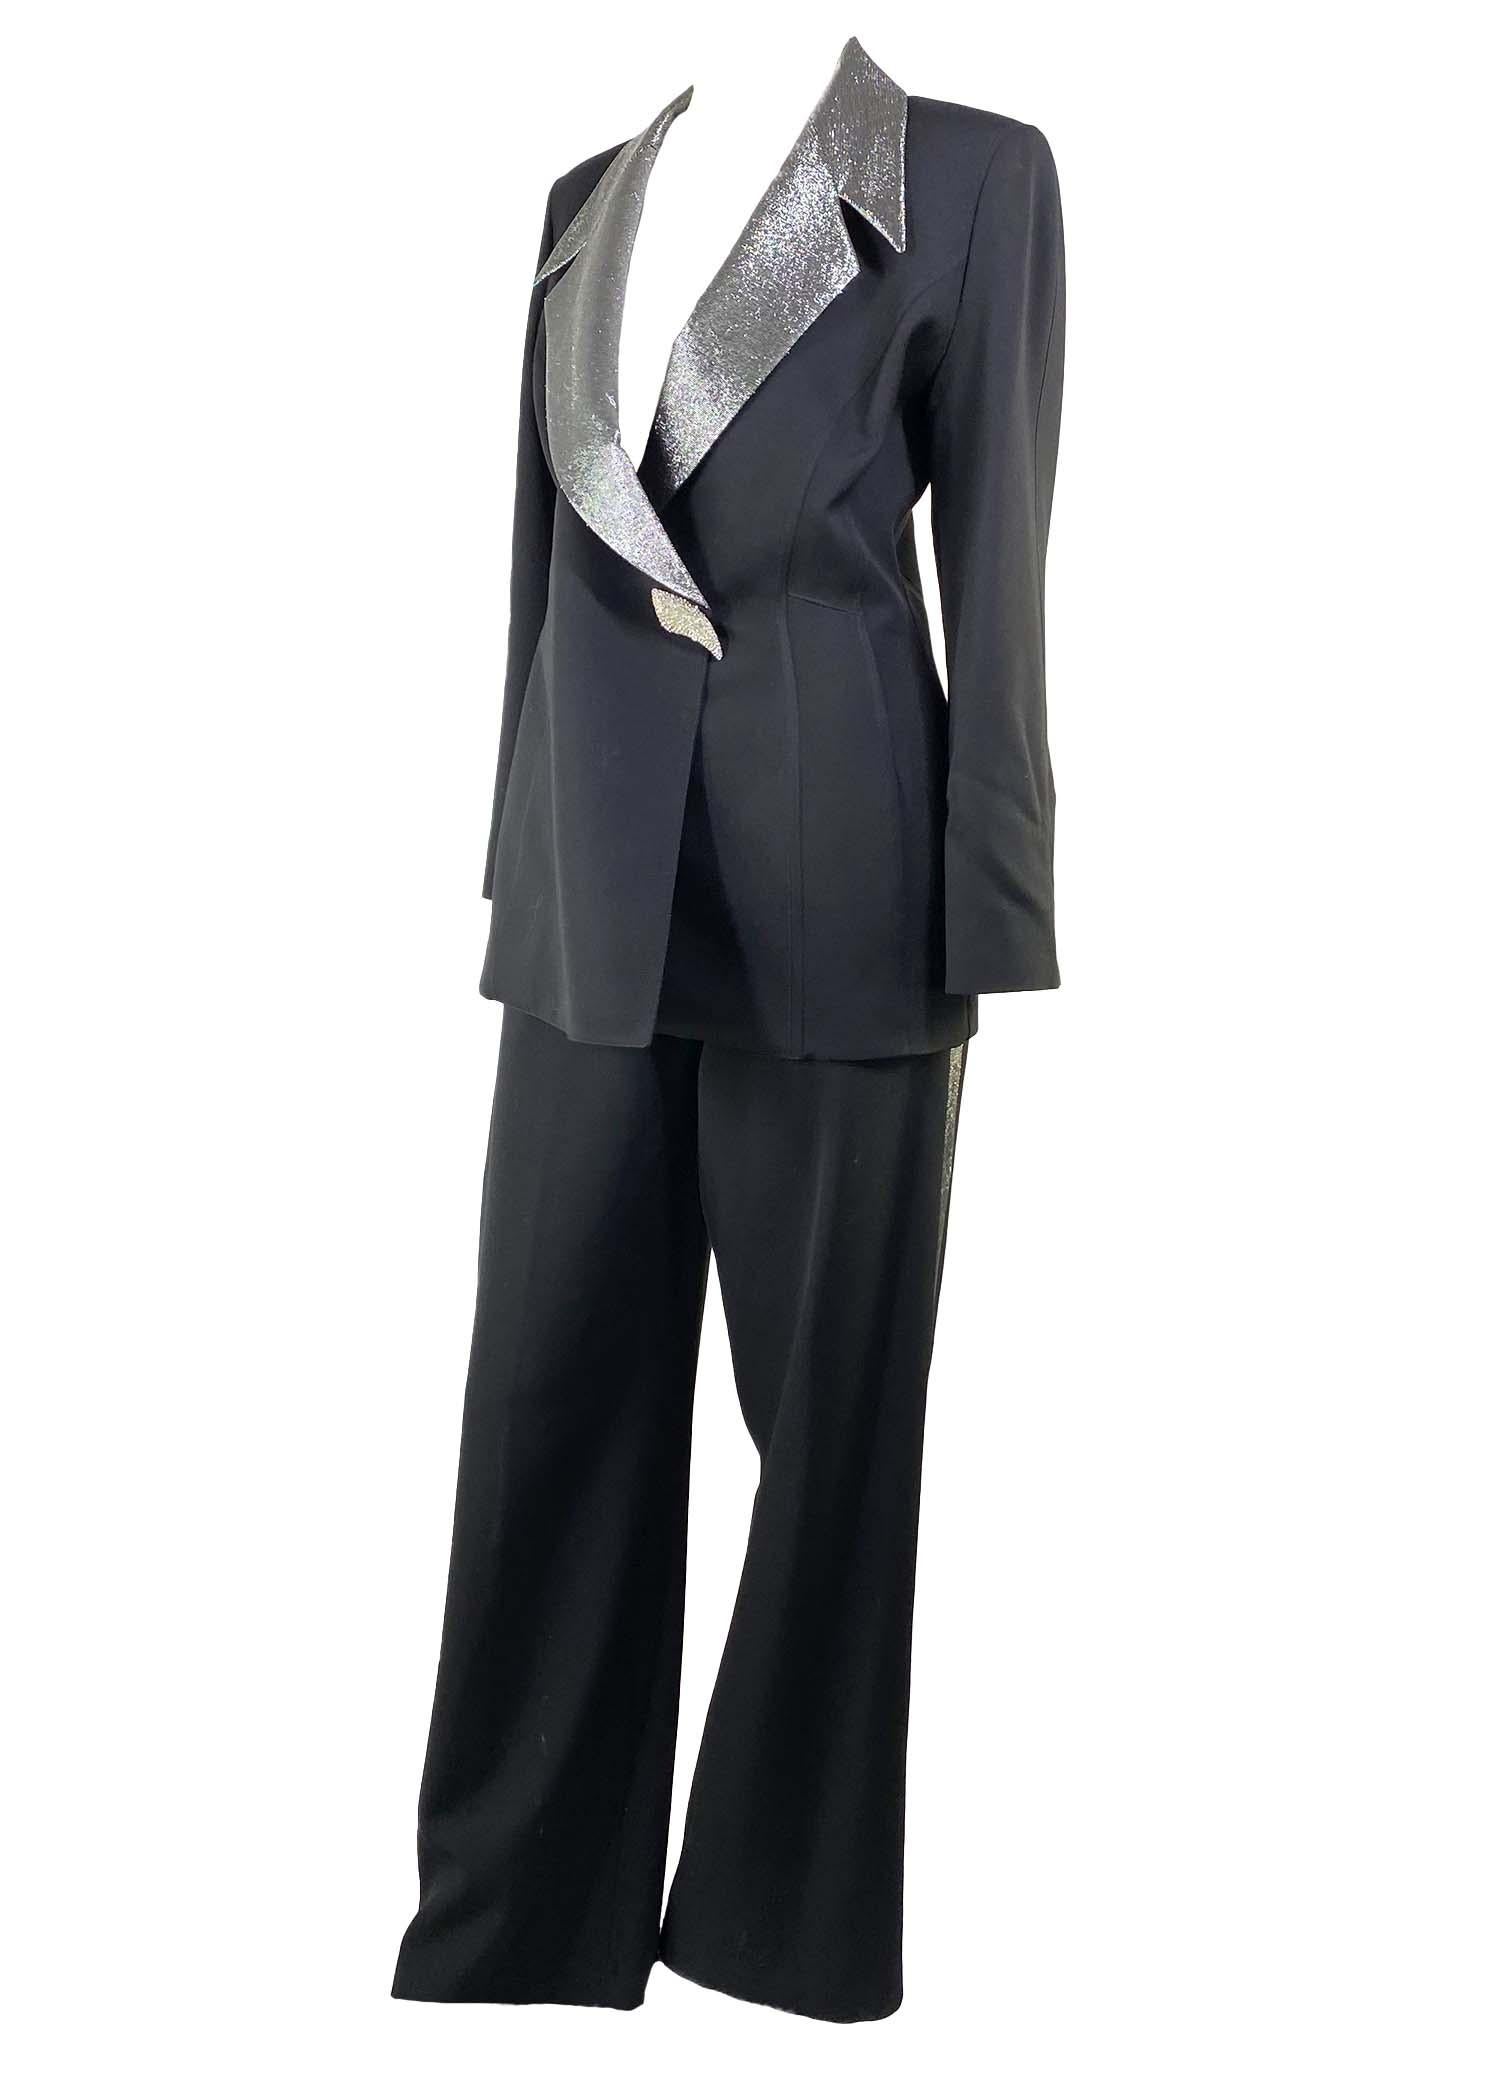 TheRealList presents: a silver lame Thierry Mugler pantsuit, designed by Manfred Mugler. From the 1990s, this suit features masterful design and tailoring. The blazer features a large sculptural silver lamé lapel and rhinestone encrusted snap